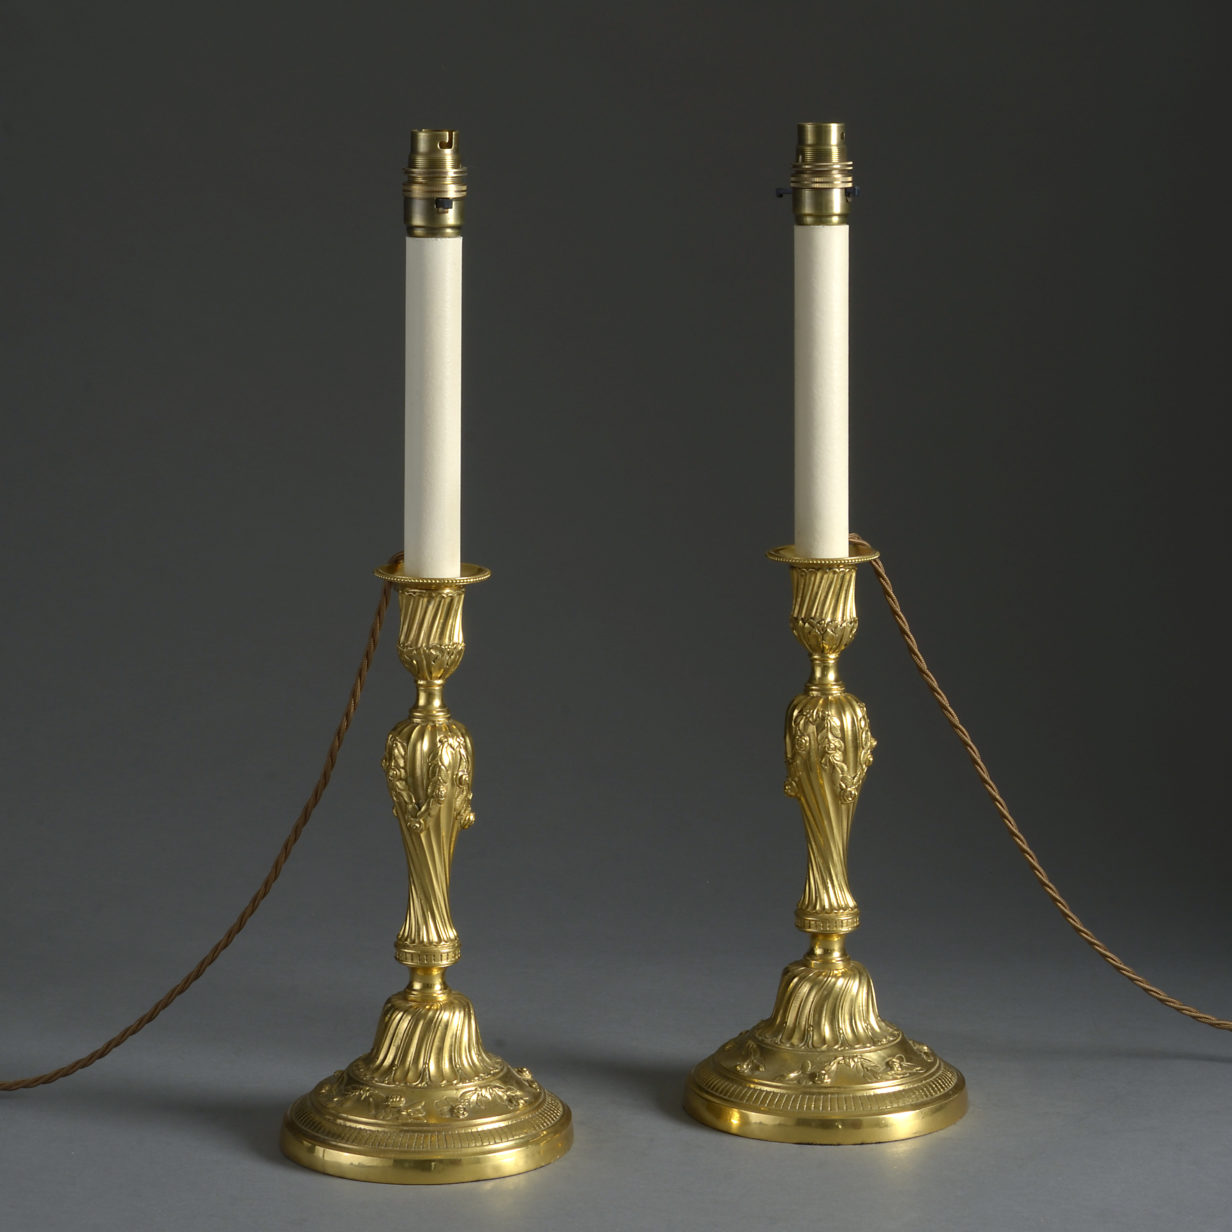 Pair of 19th century louis xv style rococo ormolu candlestick lamps